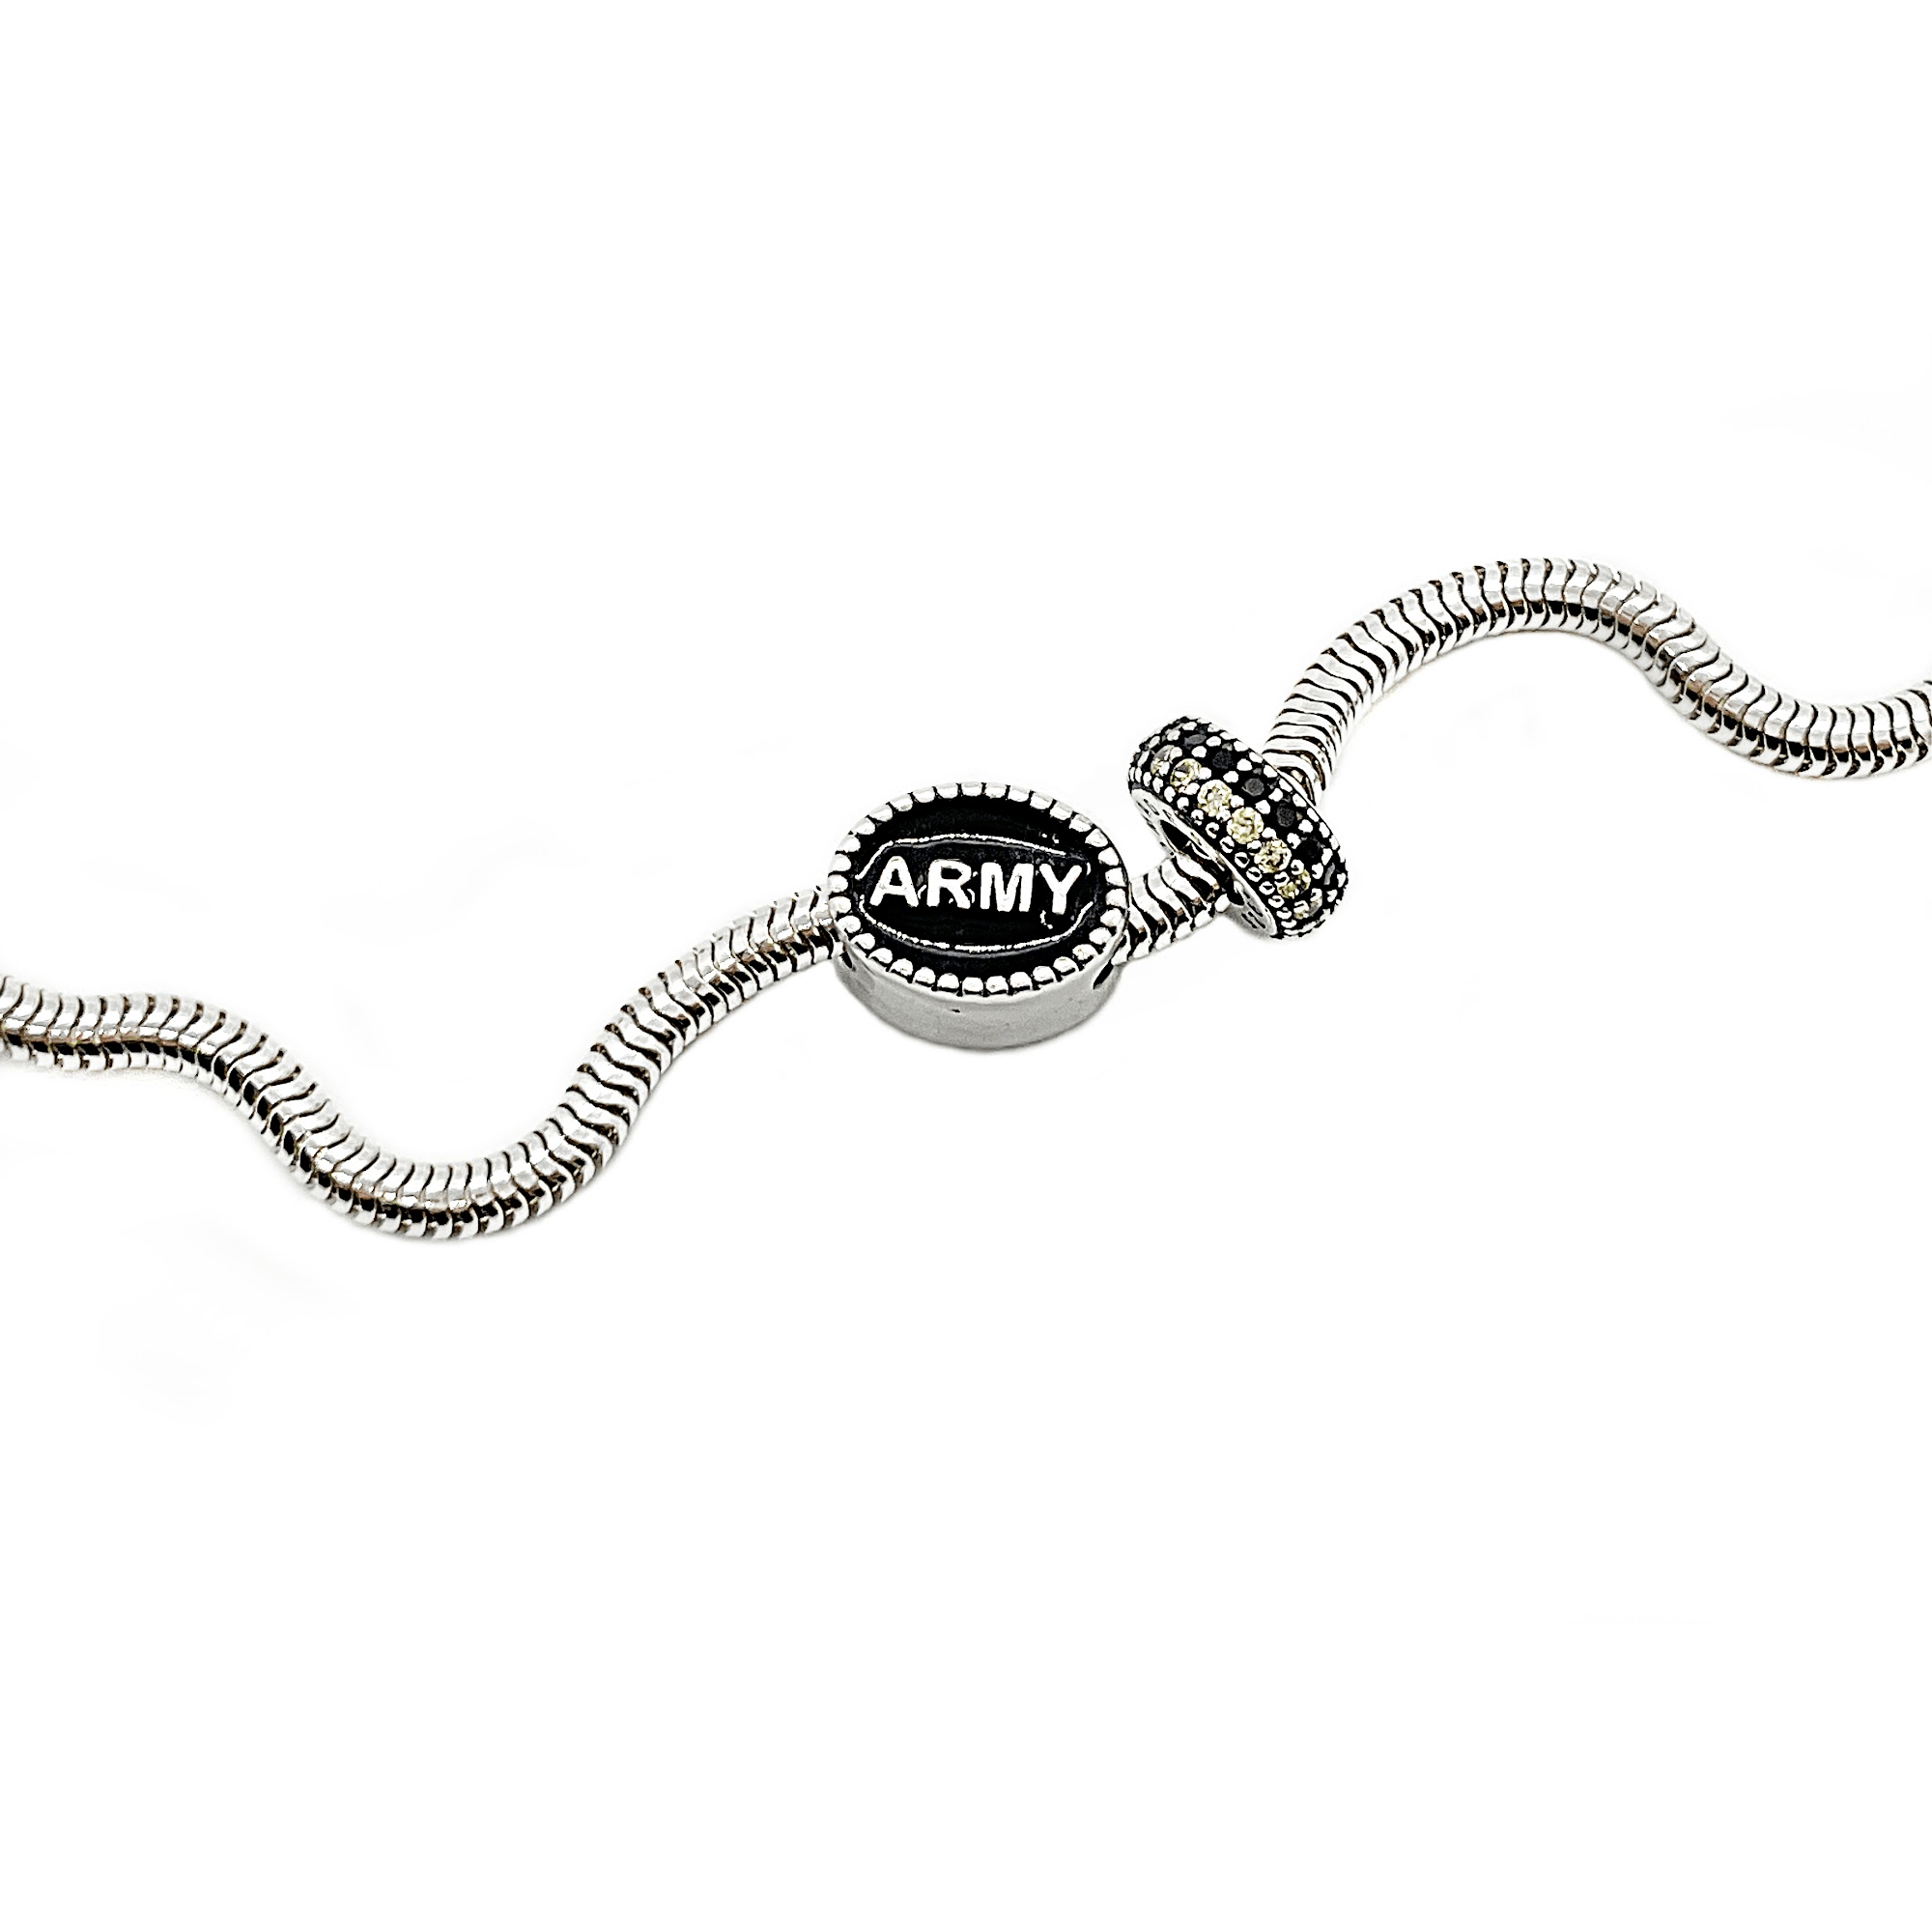 Army Bead Charms and Spacers